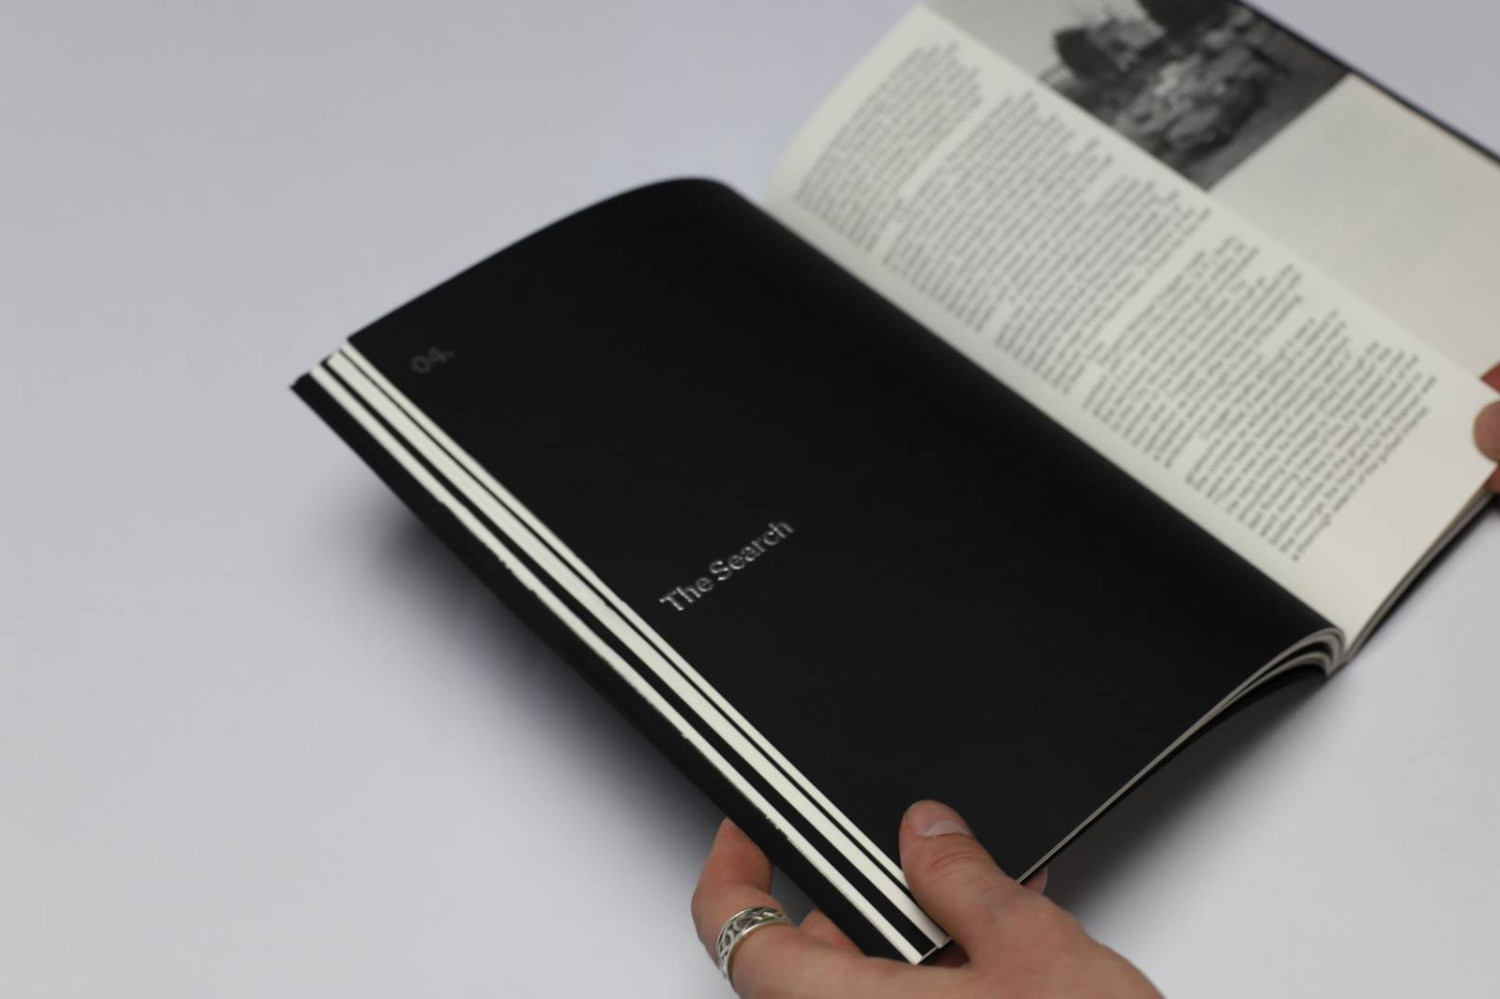 Other than the black Sirio paper, the publication is printed on 100gsm Munken pure paper.